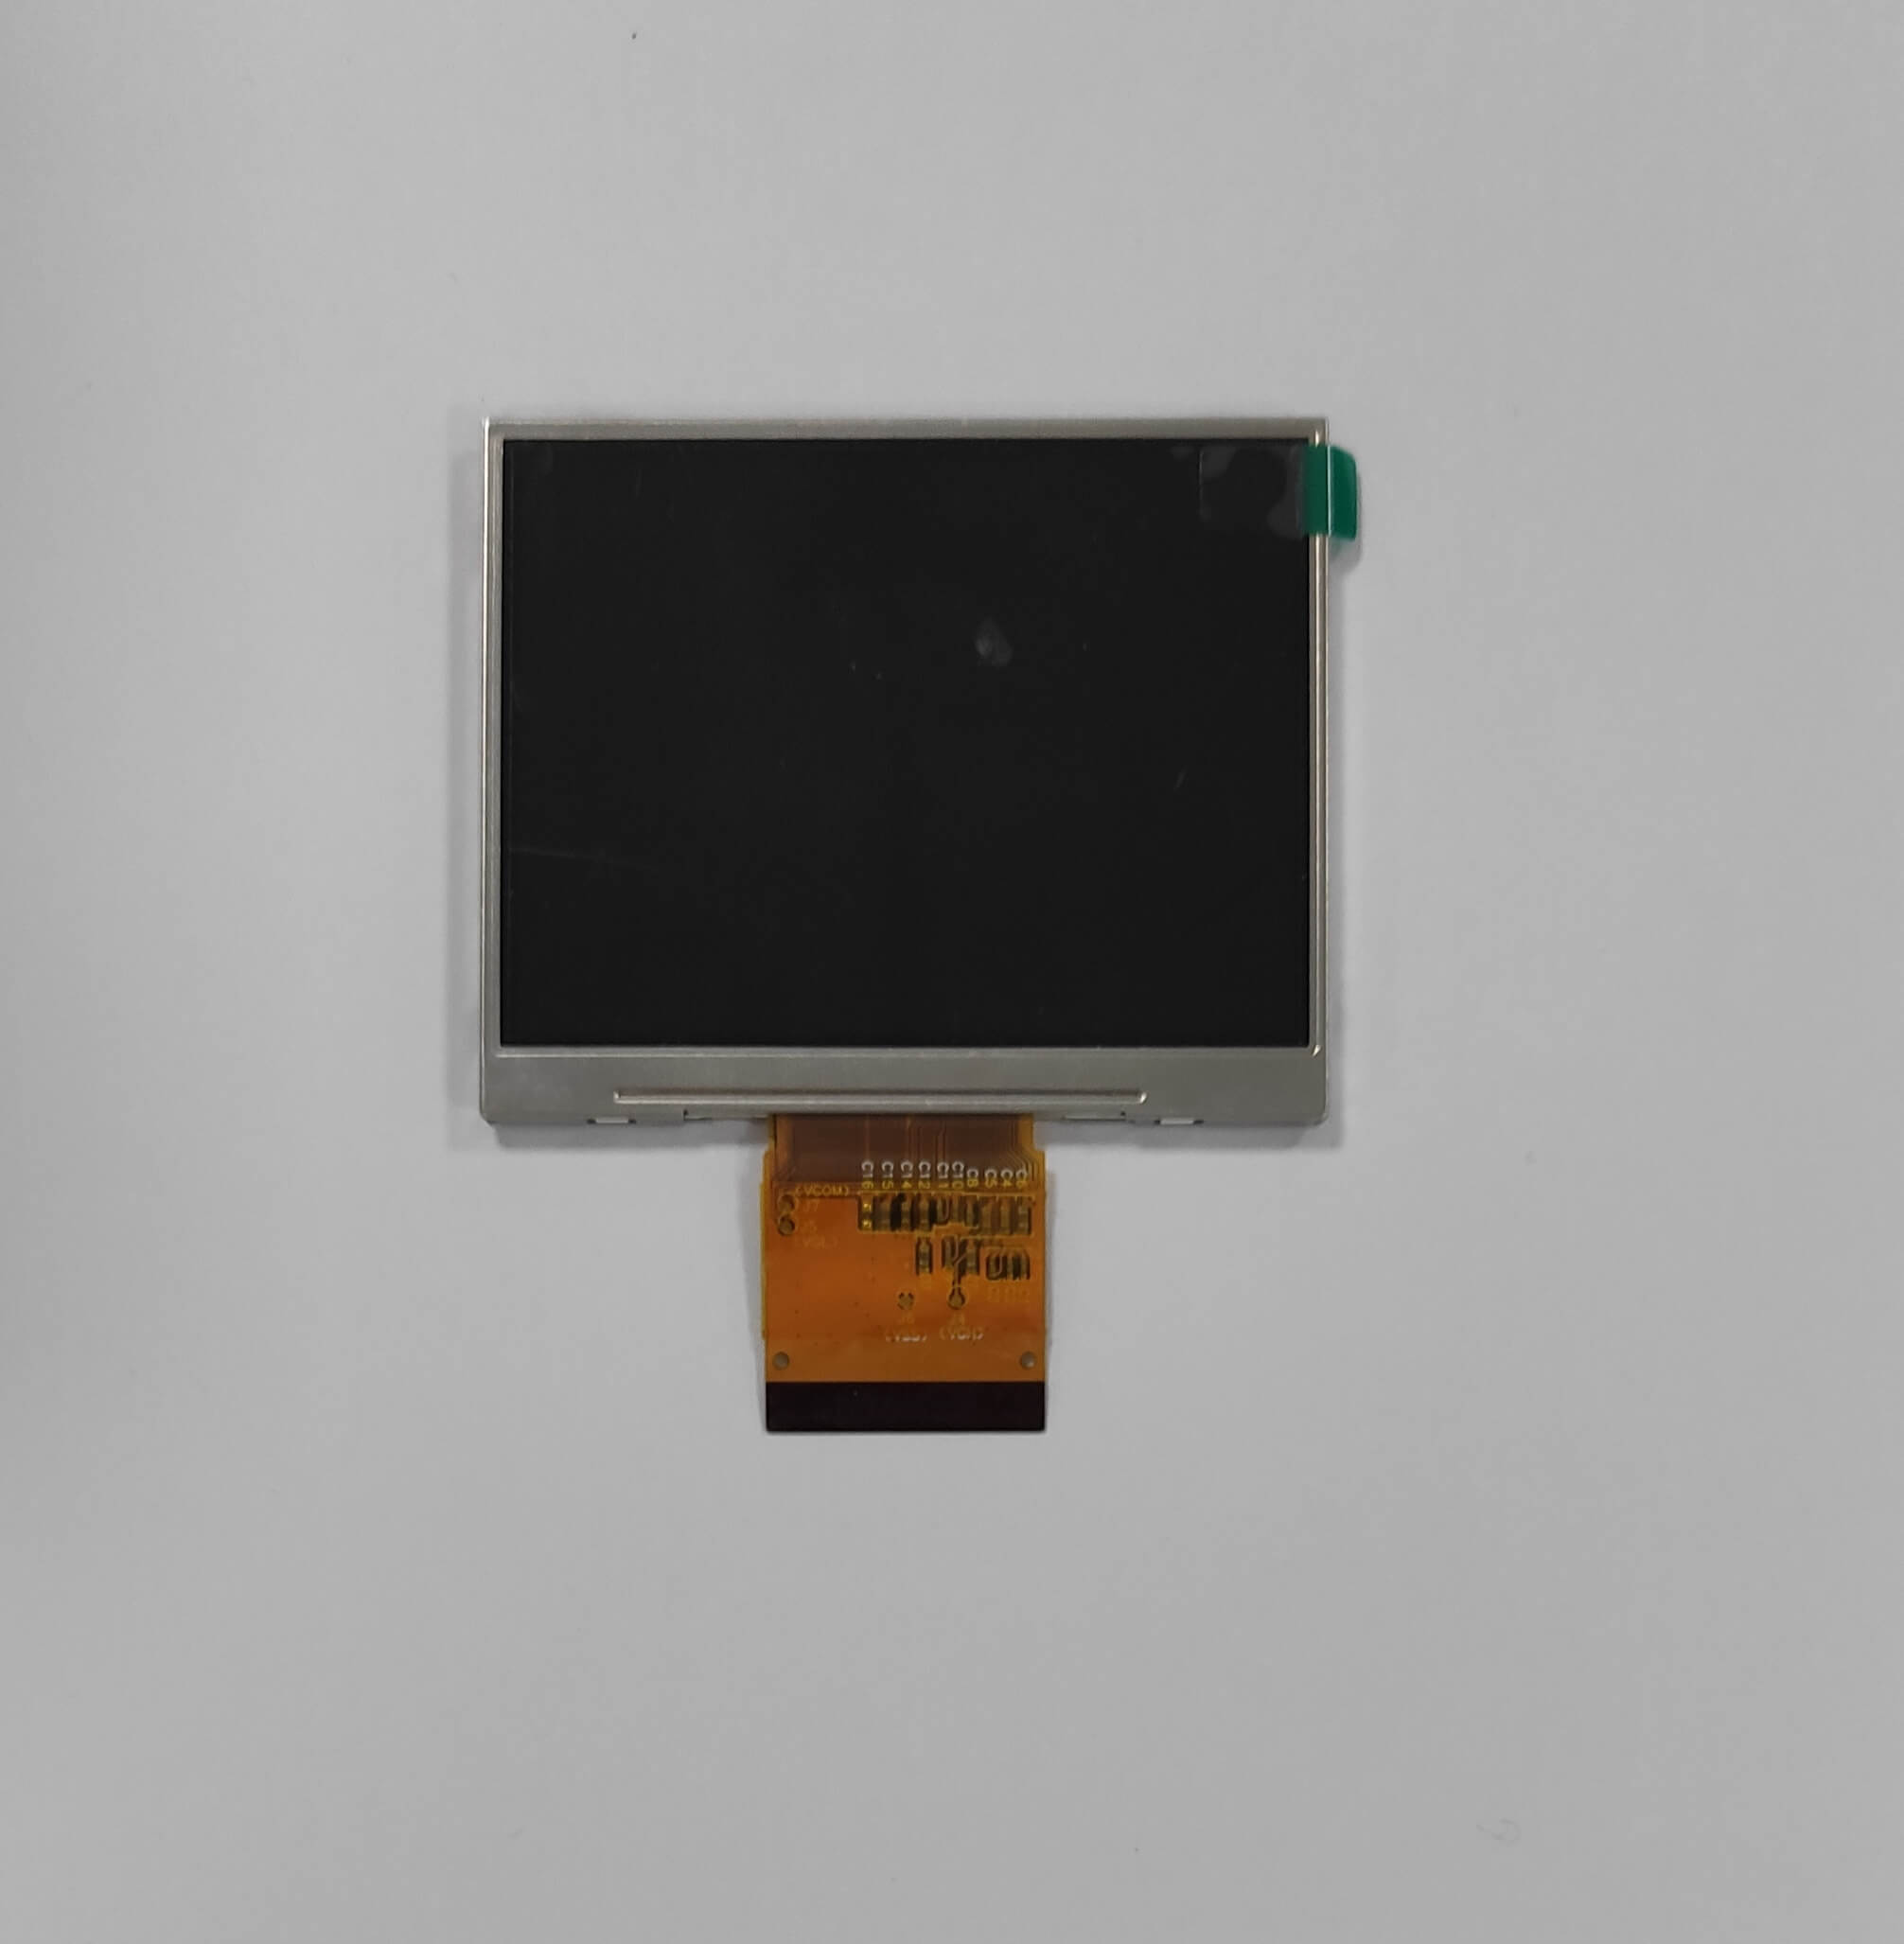 3.5 inch 320*240  TFT LCD display, support RGB/MCU/SPI Interface